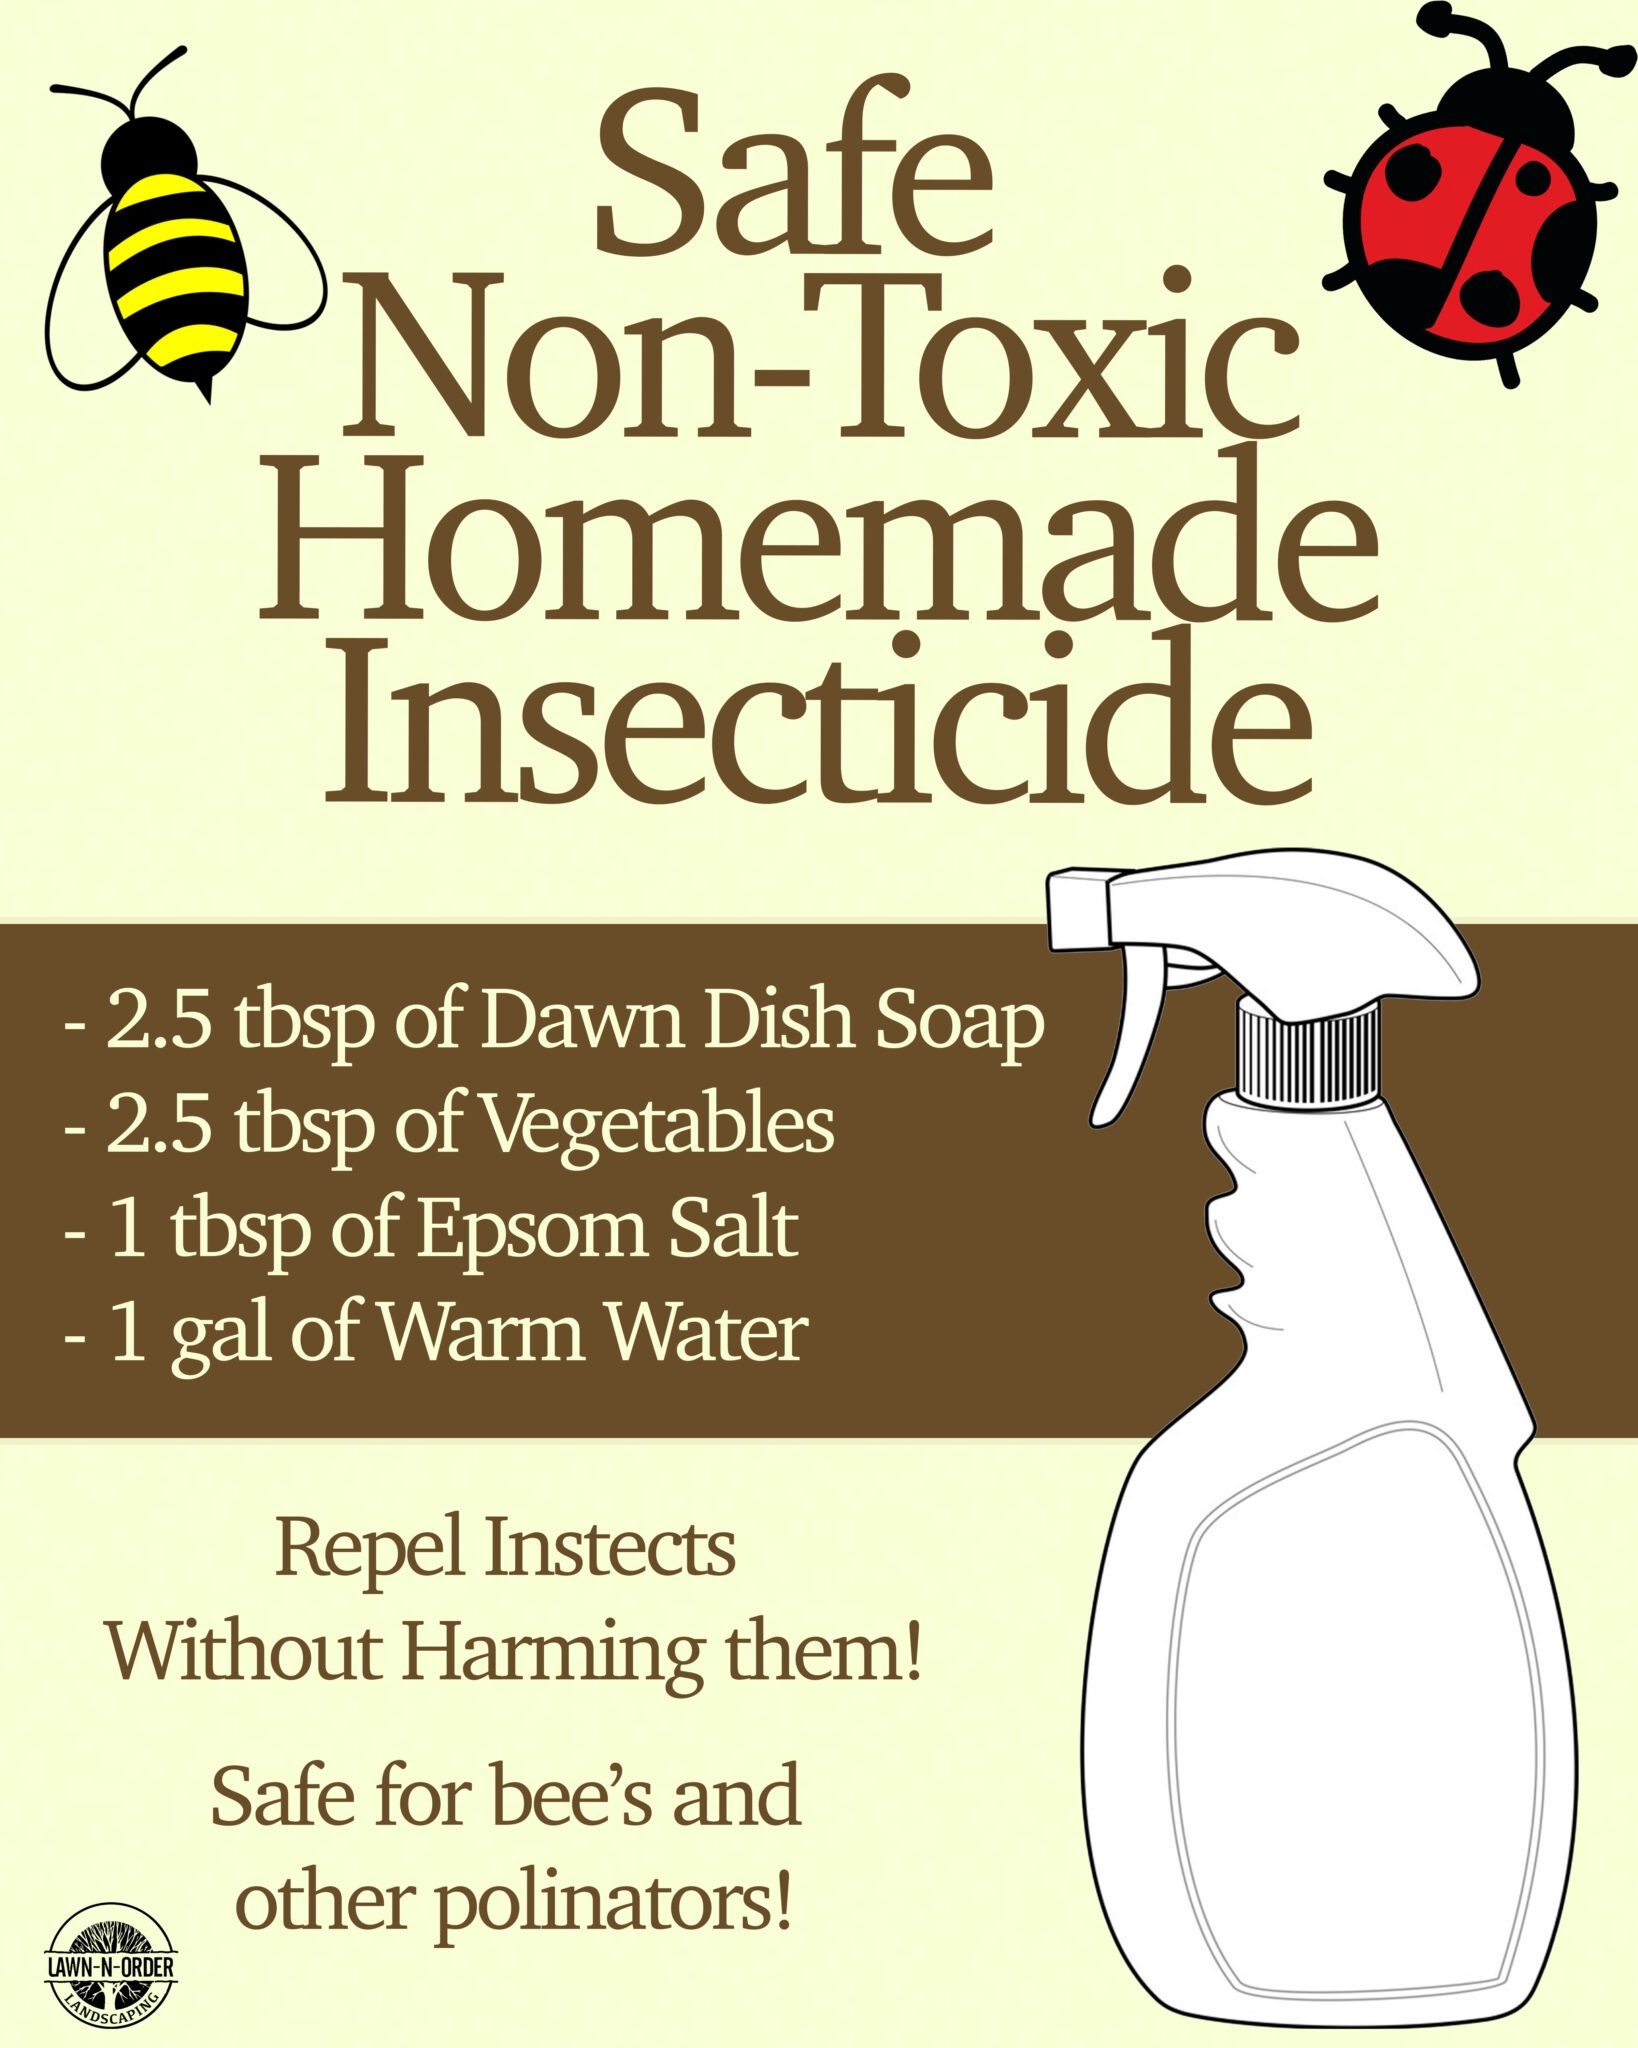 Making homemade pest control solutions - Appropedia, the